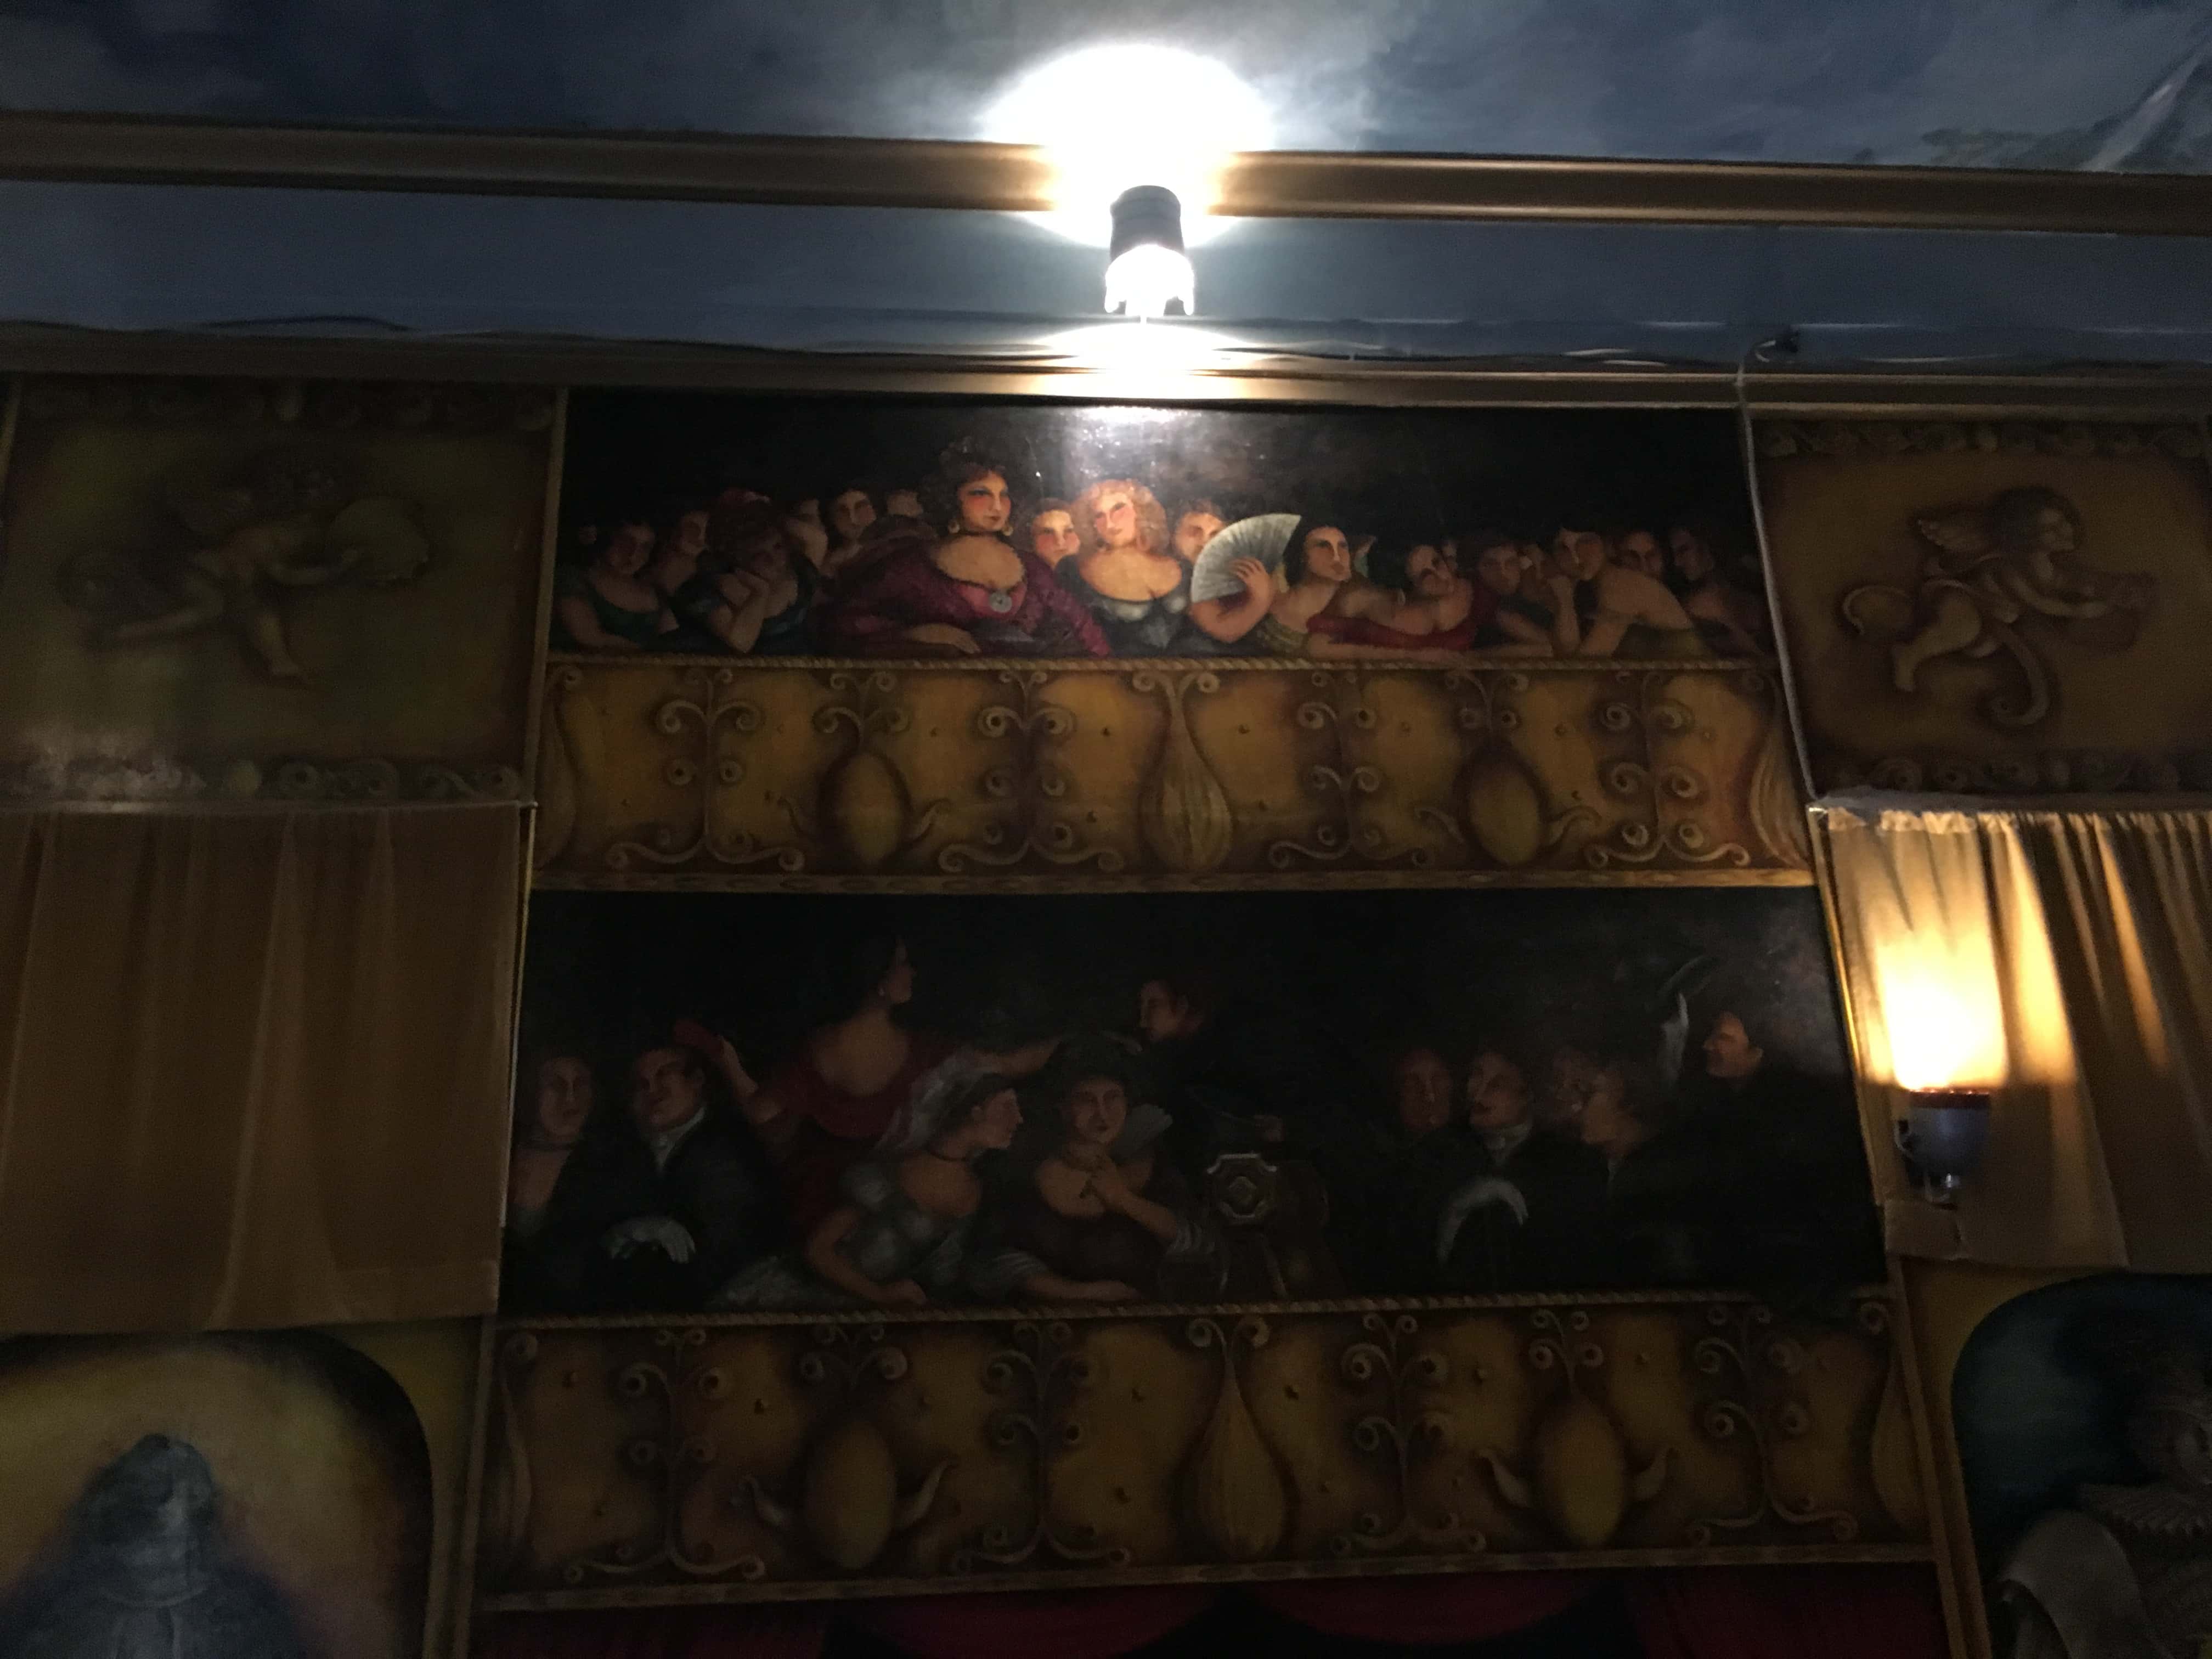 Mural of audience members of the Amargosa Opera House